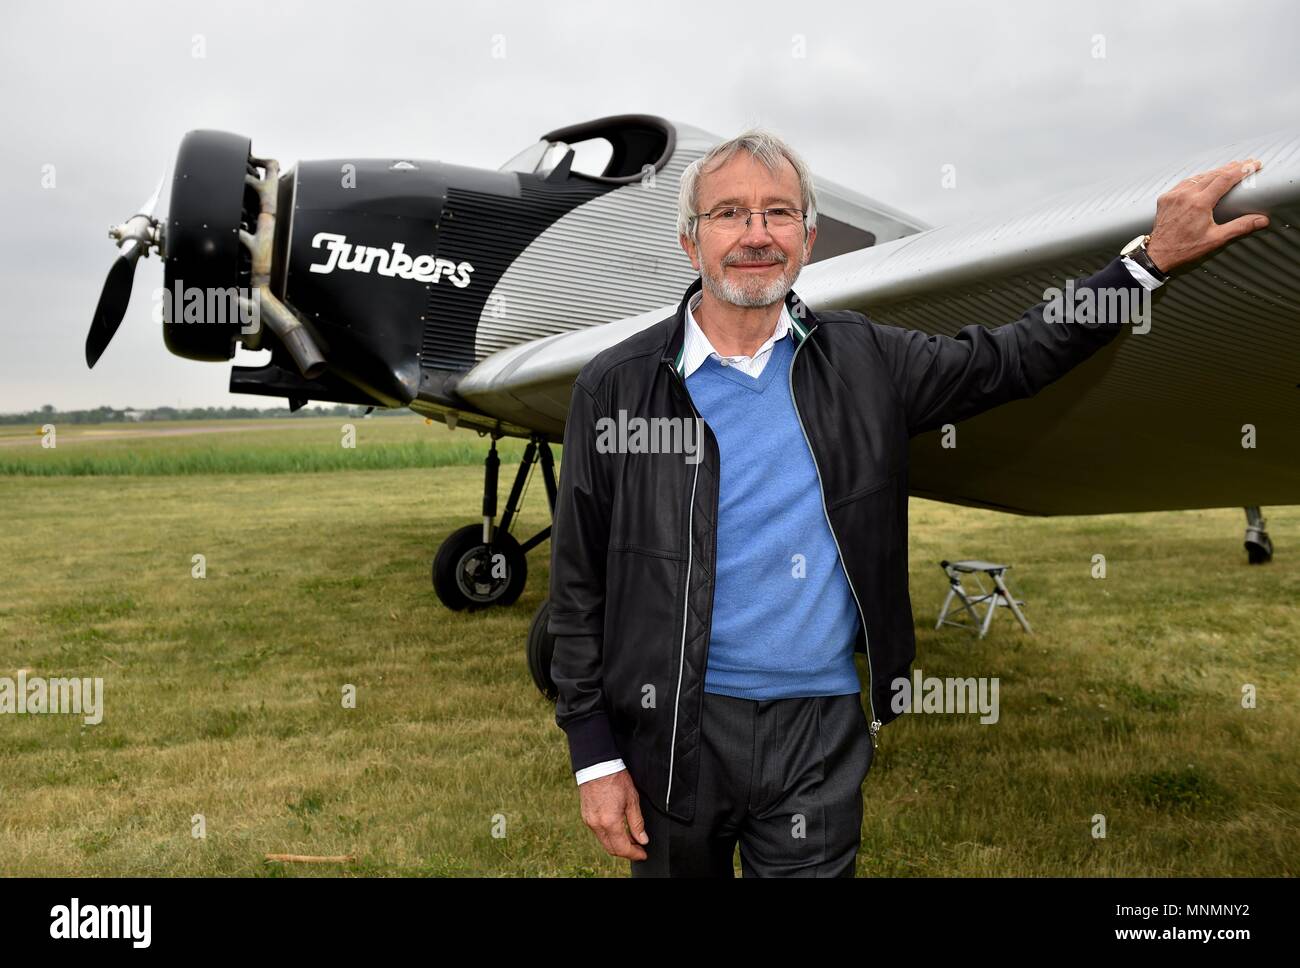 18 May 2018, Germany, Dessau-Rosslau: Bernd Junkers, grandson of Prof. Hugo Junkers, standing beside a replica of a Junkers F 13 which has landed at the airfield during the 13th Hugo Junkers Festival. The replica of one of Prof. Hugo Junkers' most famous creations is the only airworthy example of its kind. It was faithfully built over more than 10 years using original construction plans and laser measurements of museum planes. Photo: Frank May/dpa/ZB Stock Photo